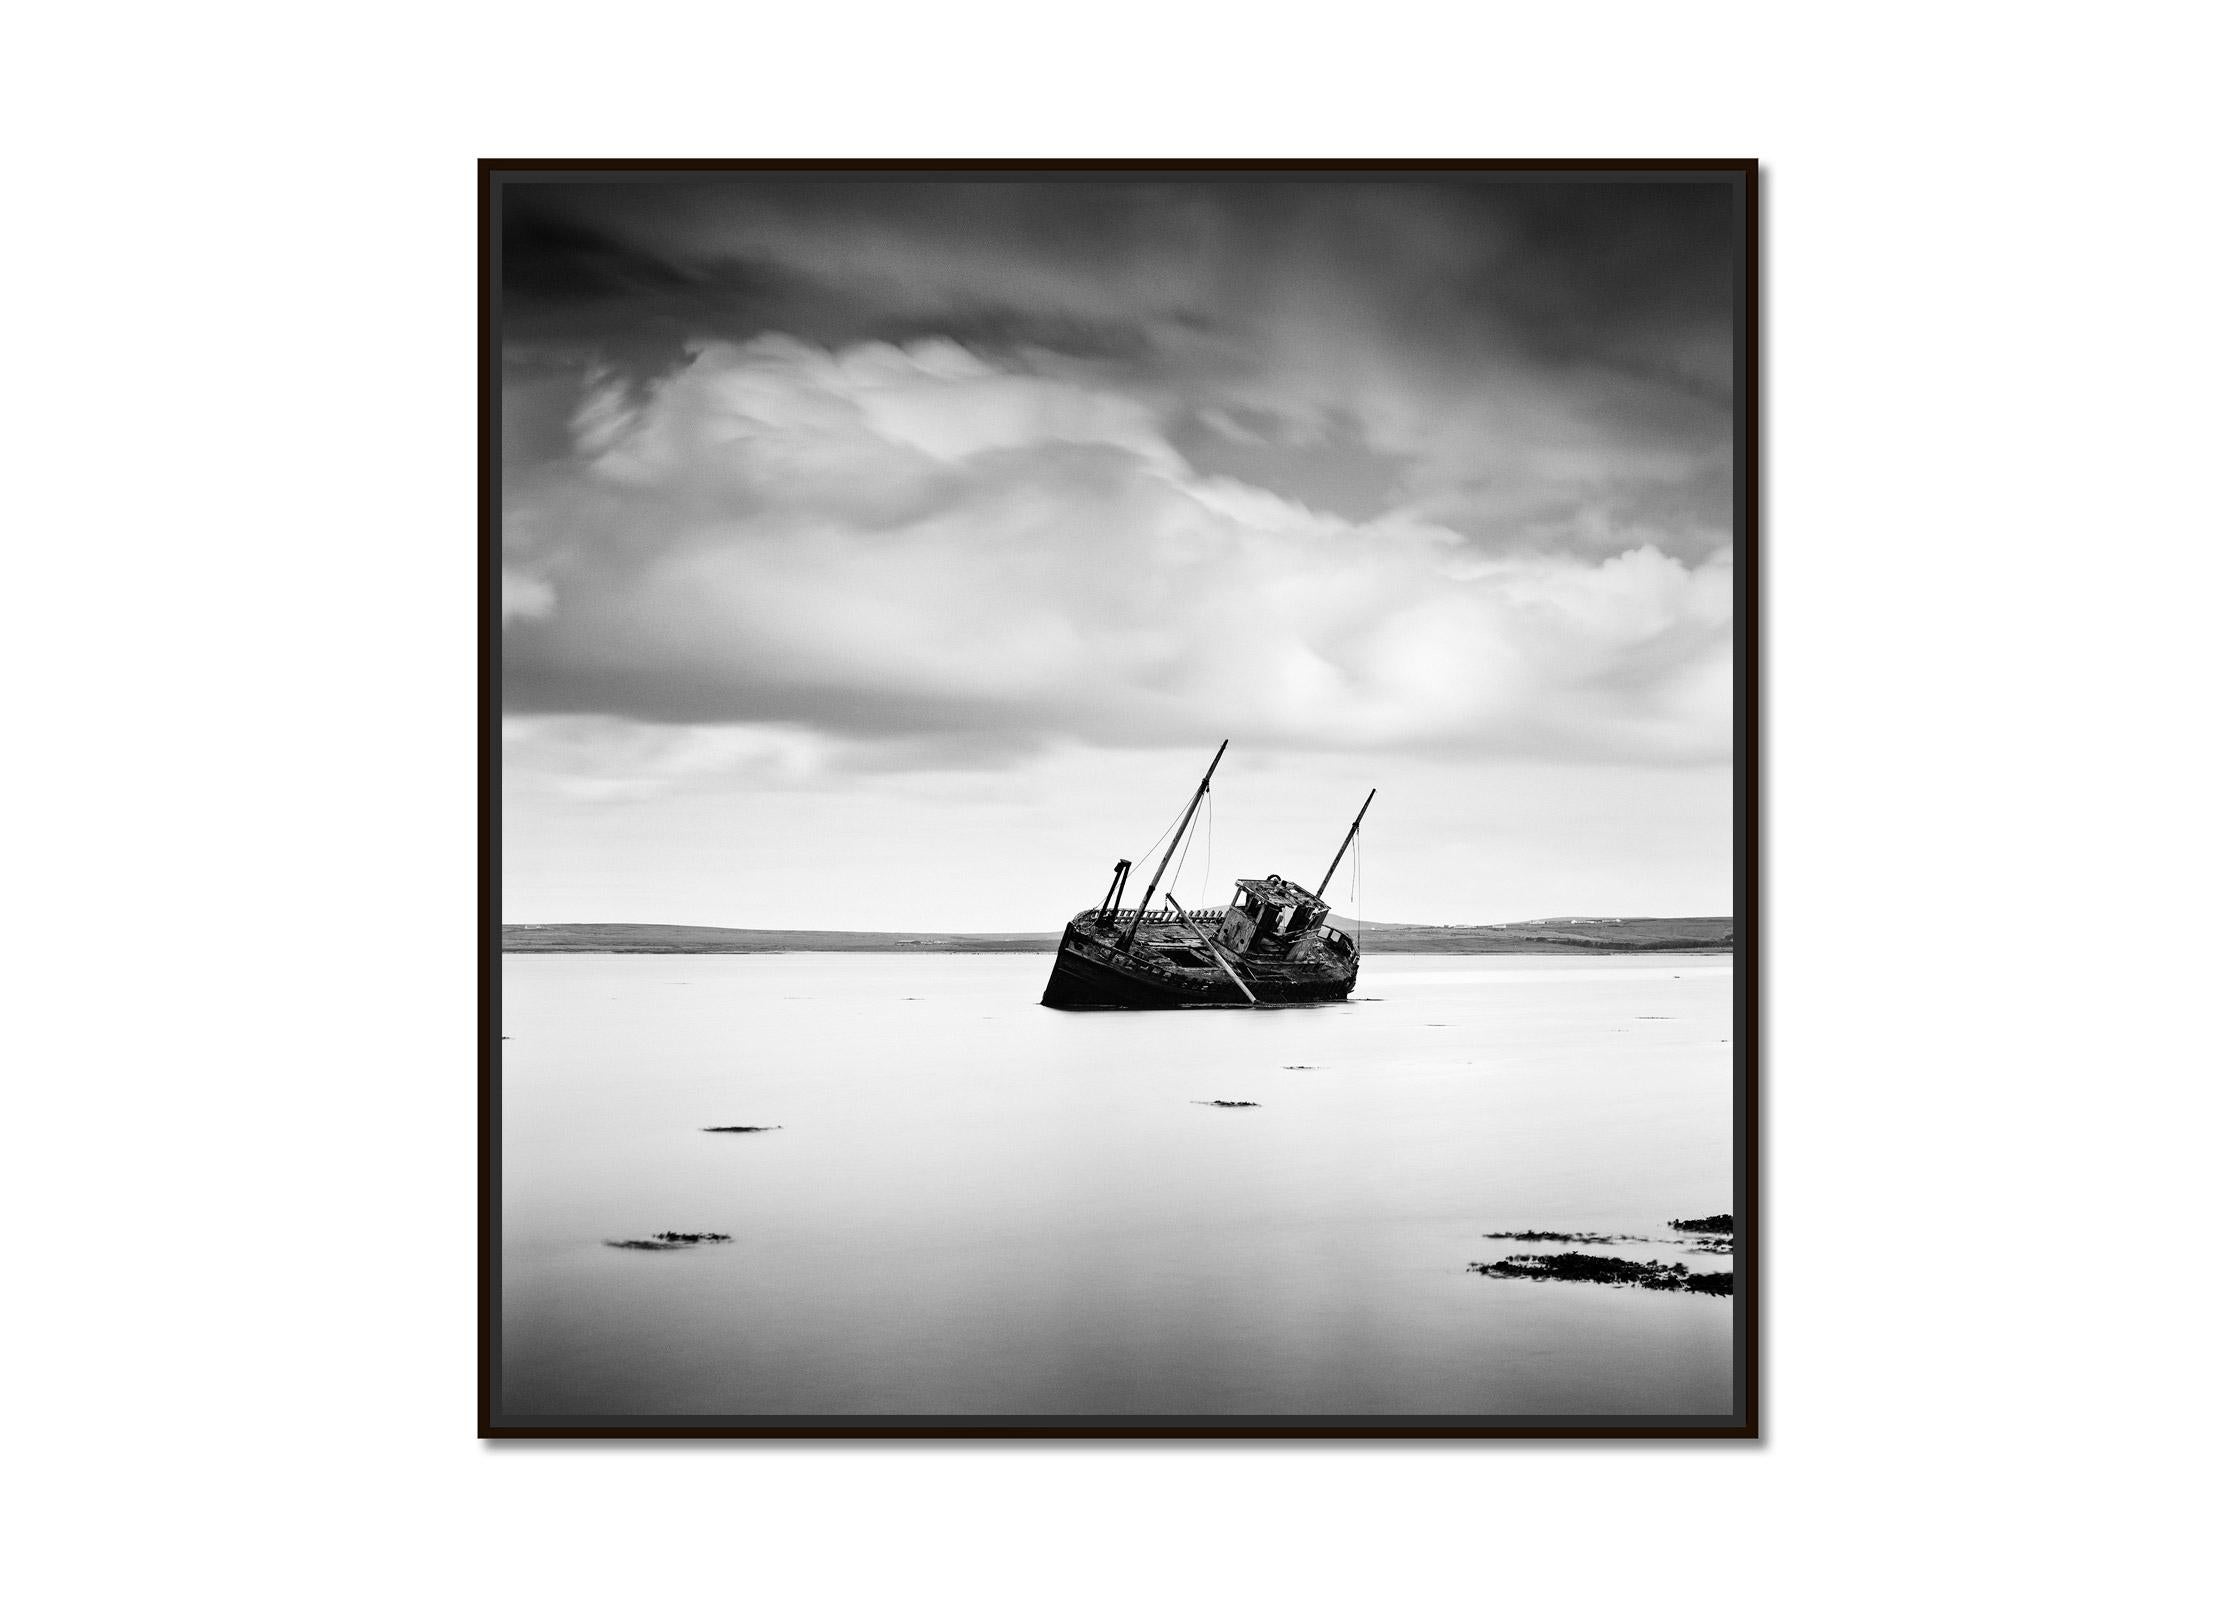 Stranded fishing Boat, beach, Ireland, black and white photography, landscape - Photograph by Gerald Berghammer